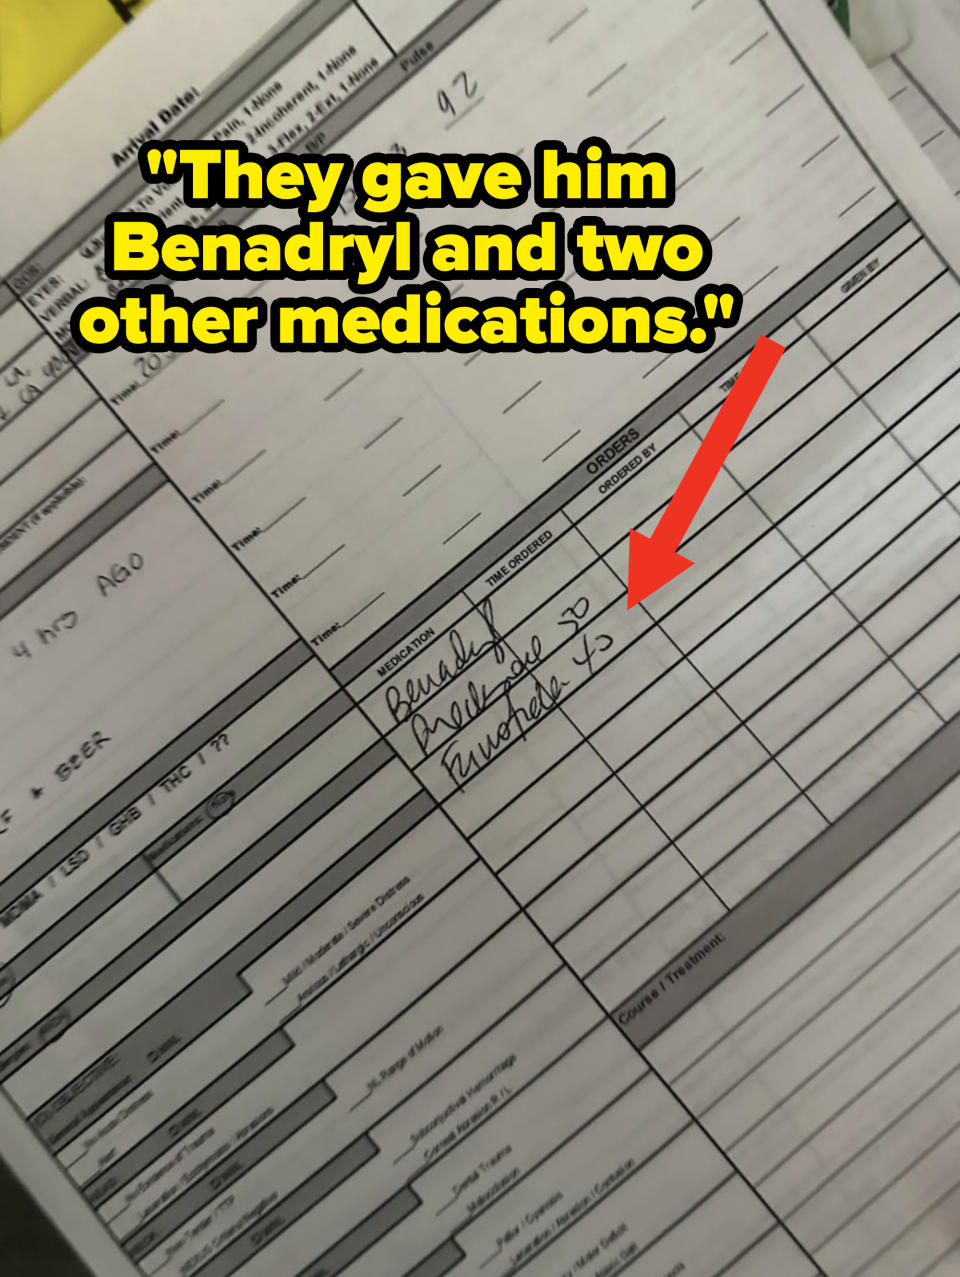 medical form with three medications written down including Benadryl